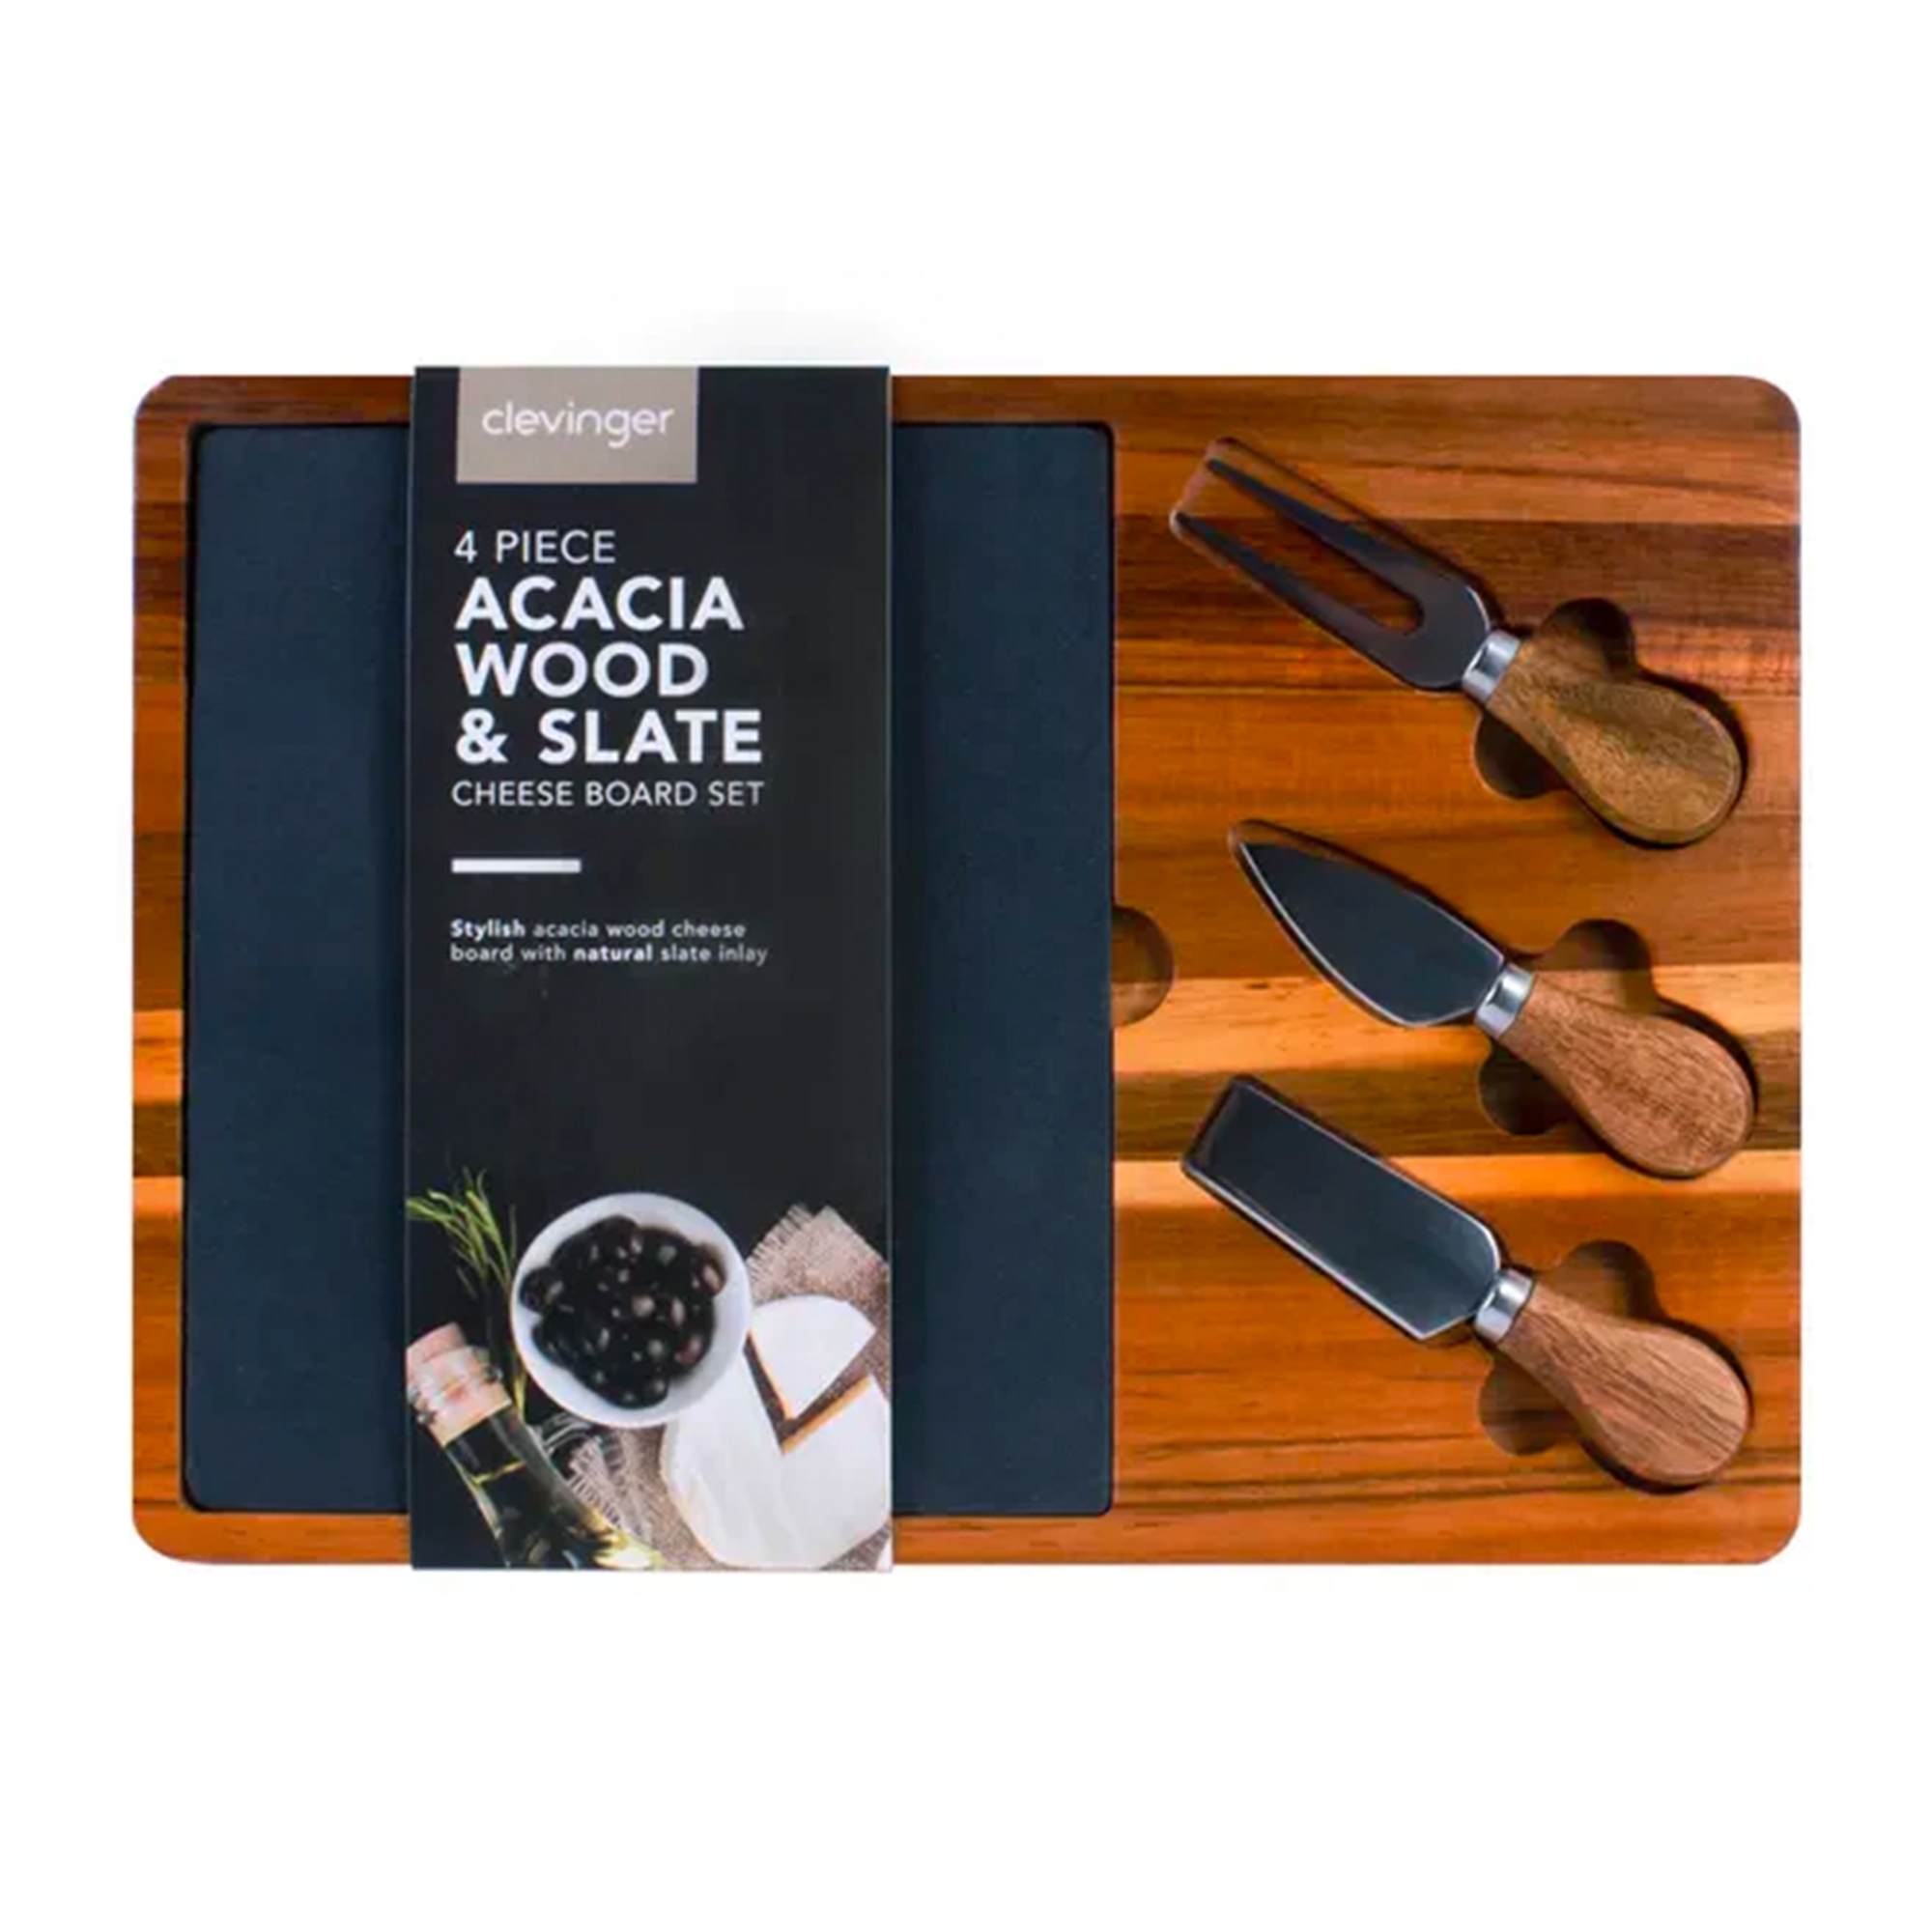 Clevinger Acacia Wood & Slate Cheese Board with Knives Set of 4 Image 1